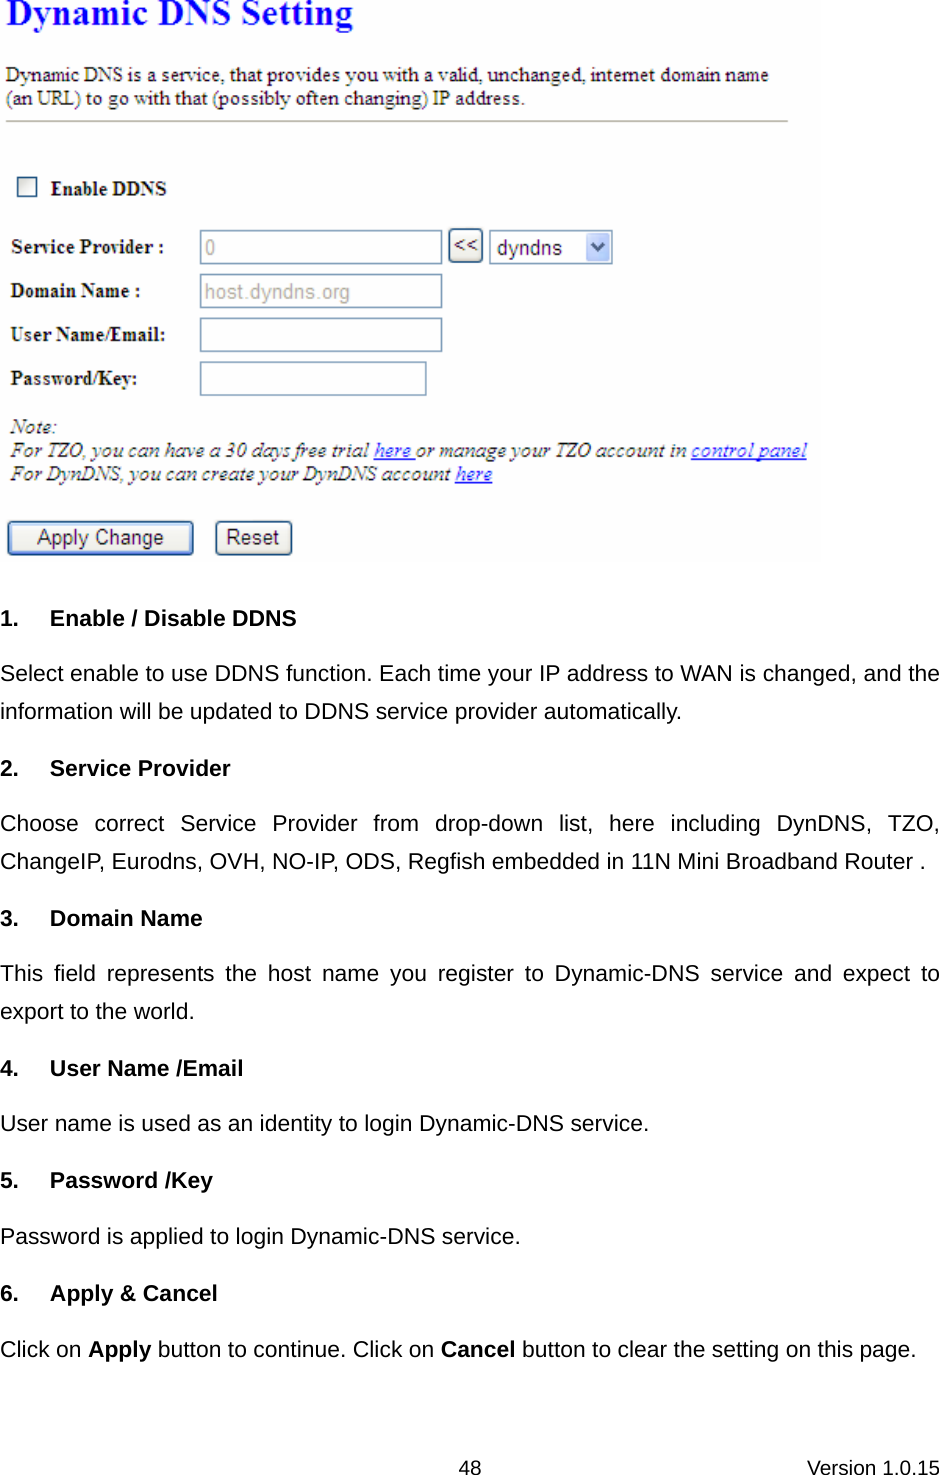 Version 1.0.15 48 1.  Enable / Disable DDNS Select enable to use DDNS function. Each time your IP address to WAN is changed, and the information will be updated to DDNS service provider automatically. 2. Service Provider Choose correct Service Provider from drop-down list, here including DynDNS, TZO, ChangeIP, Eurodns, OVH, NO-IP, ODS, Regfish embedded in 11N Mini Broadband Router .   3. Domain Name This field represents the host name you register to Dynamic-DNS service and expect to export to the world.   4. User Name /Email User name is used as an identity to login Dynamic-DNS service. 5. Password /Key Password is applied to login Dynamic-DNS service. 6. Apply &amp; Cancel Click on Apply button to continue. Click on Cancel button to clear the setting on this page.  